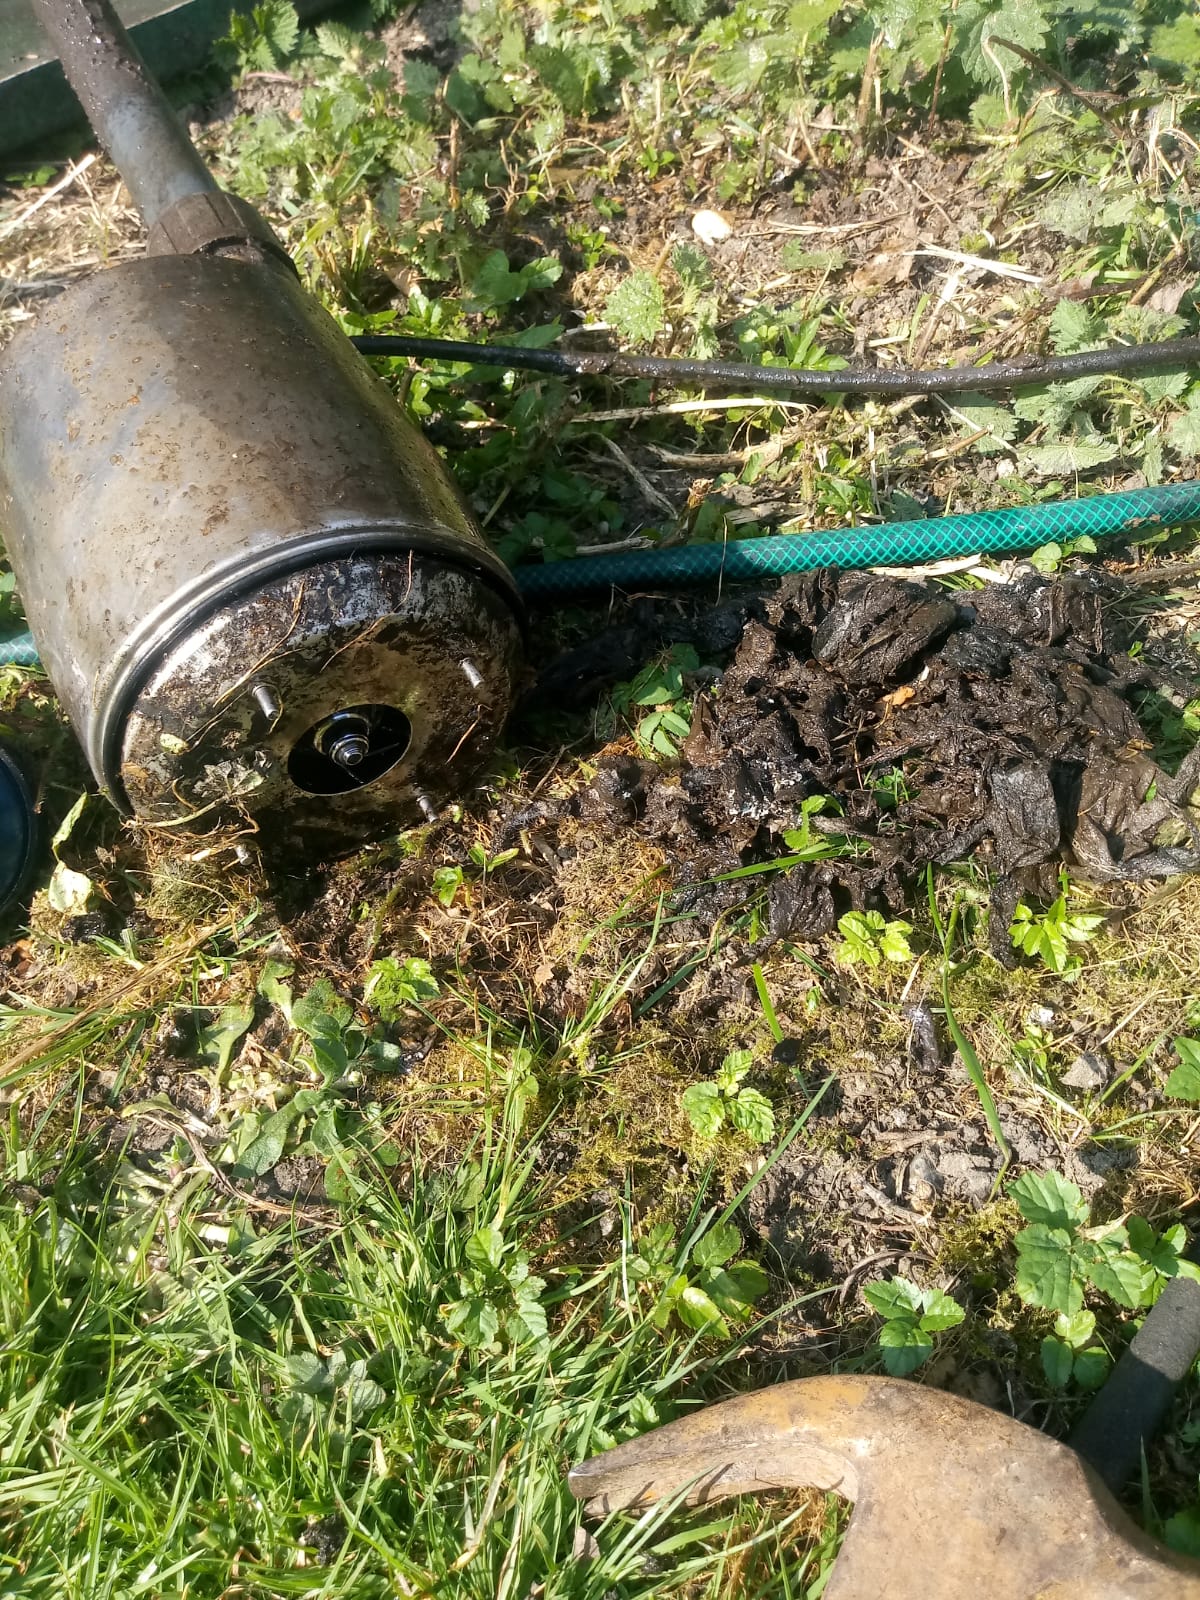 Blockage removed from a pipe in Harlow after septic tank problem